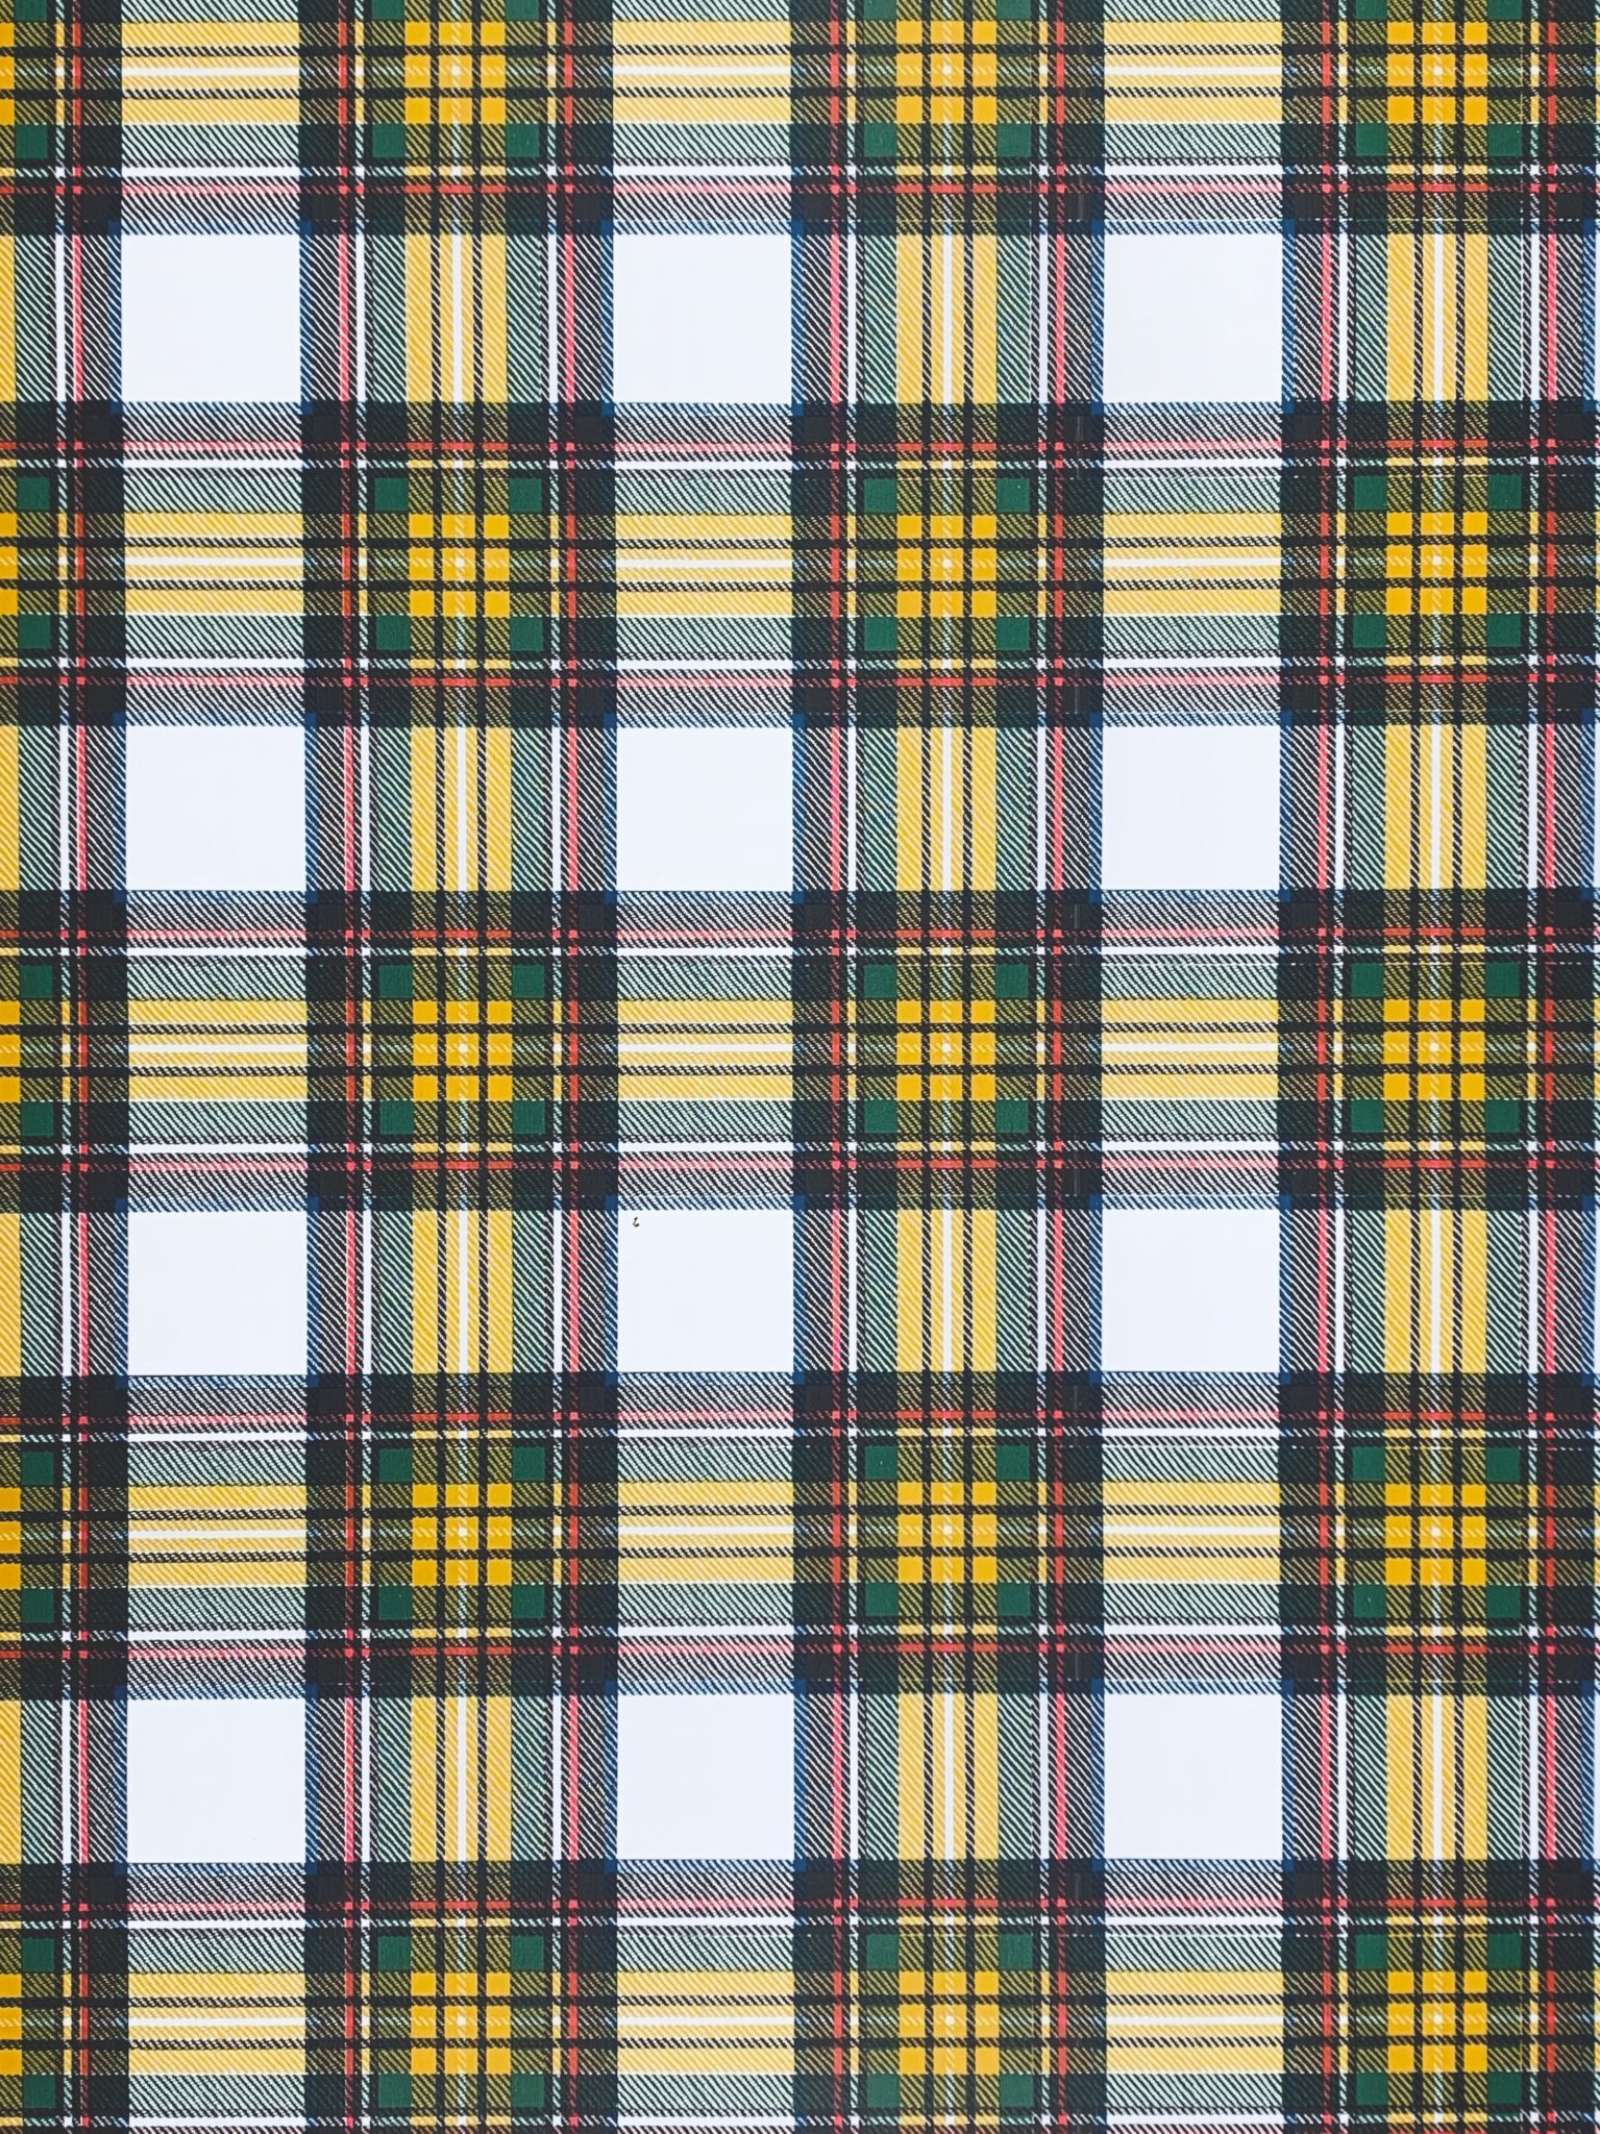 Checkered Wallpapers